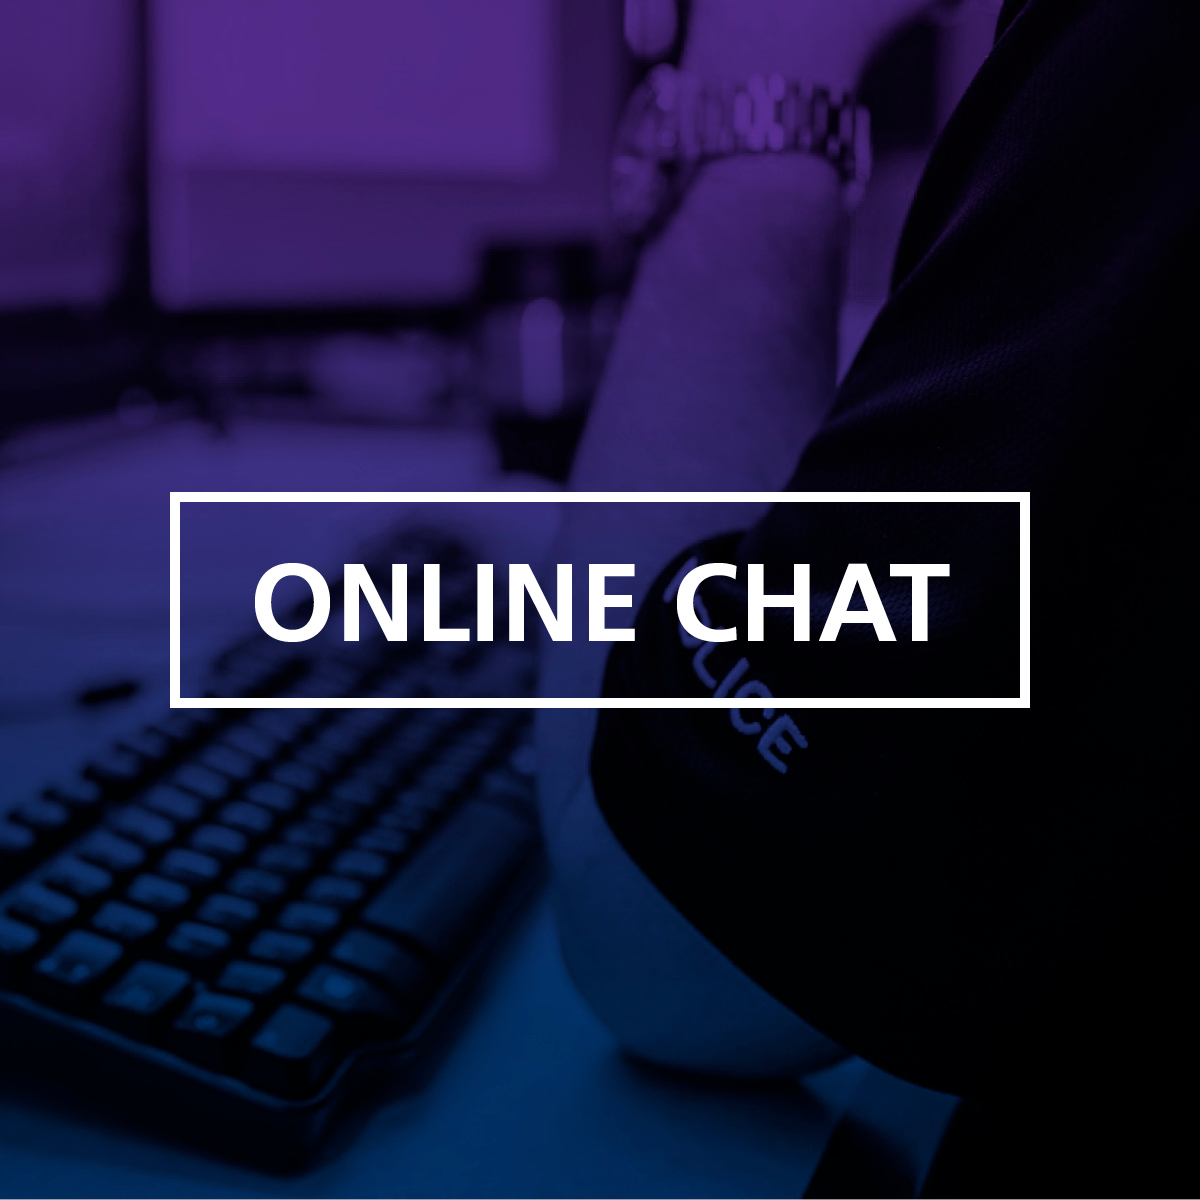 Our next online chat will be Wednesday 22nd May 2024 6:00pm - 8:00pm. You can submit questions now by clicking the link, no questions will be answered till the chat goes live. Thank You orlo.uk/OIWAI